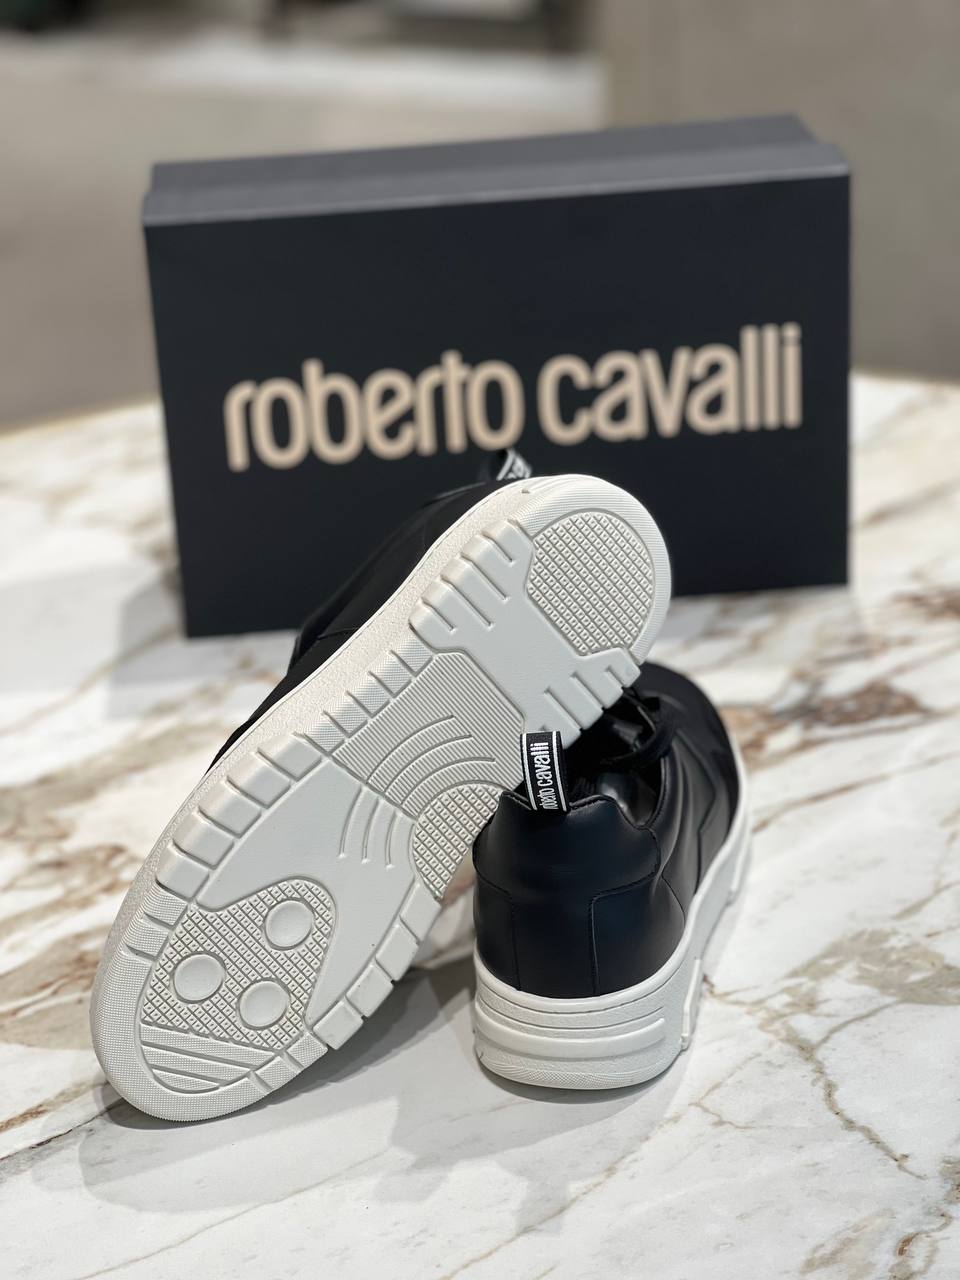 Roberto Cavalli Outlets 4692